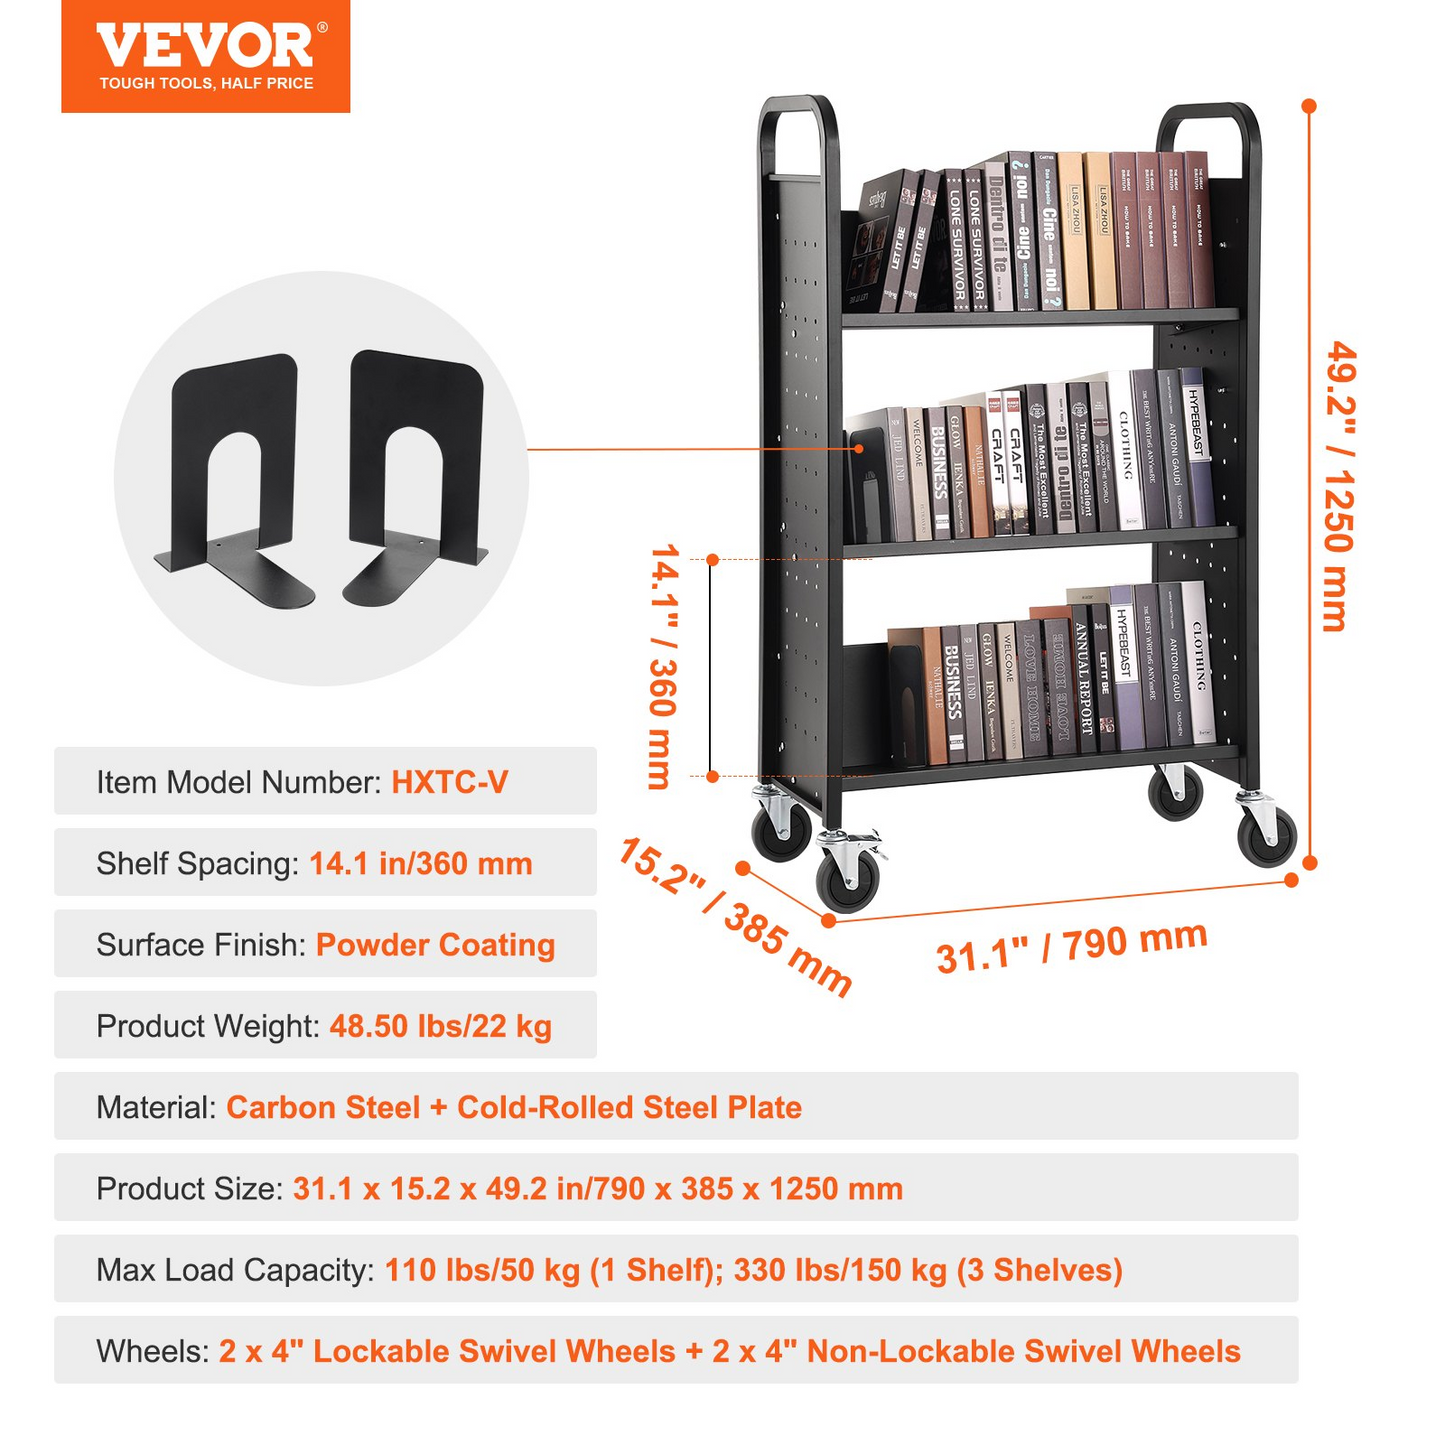 VEVOR Book Cart, 330 lbs Library Cart, 31.1" x 15.2" x 49.2" Rolling Book Cart, Single Sided V-Shaped Sloped Shelves with 4-Inch Lockable Wheels for Home Shelves Office and School, Book Truck in Black, Goodies N Stuff